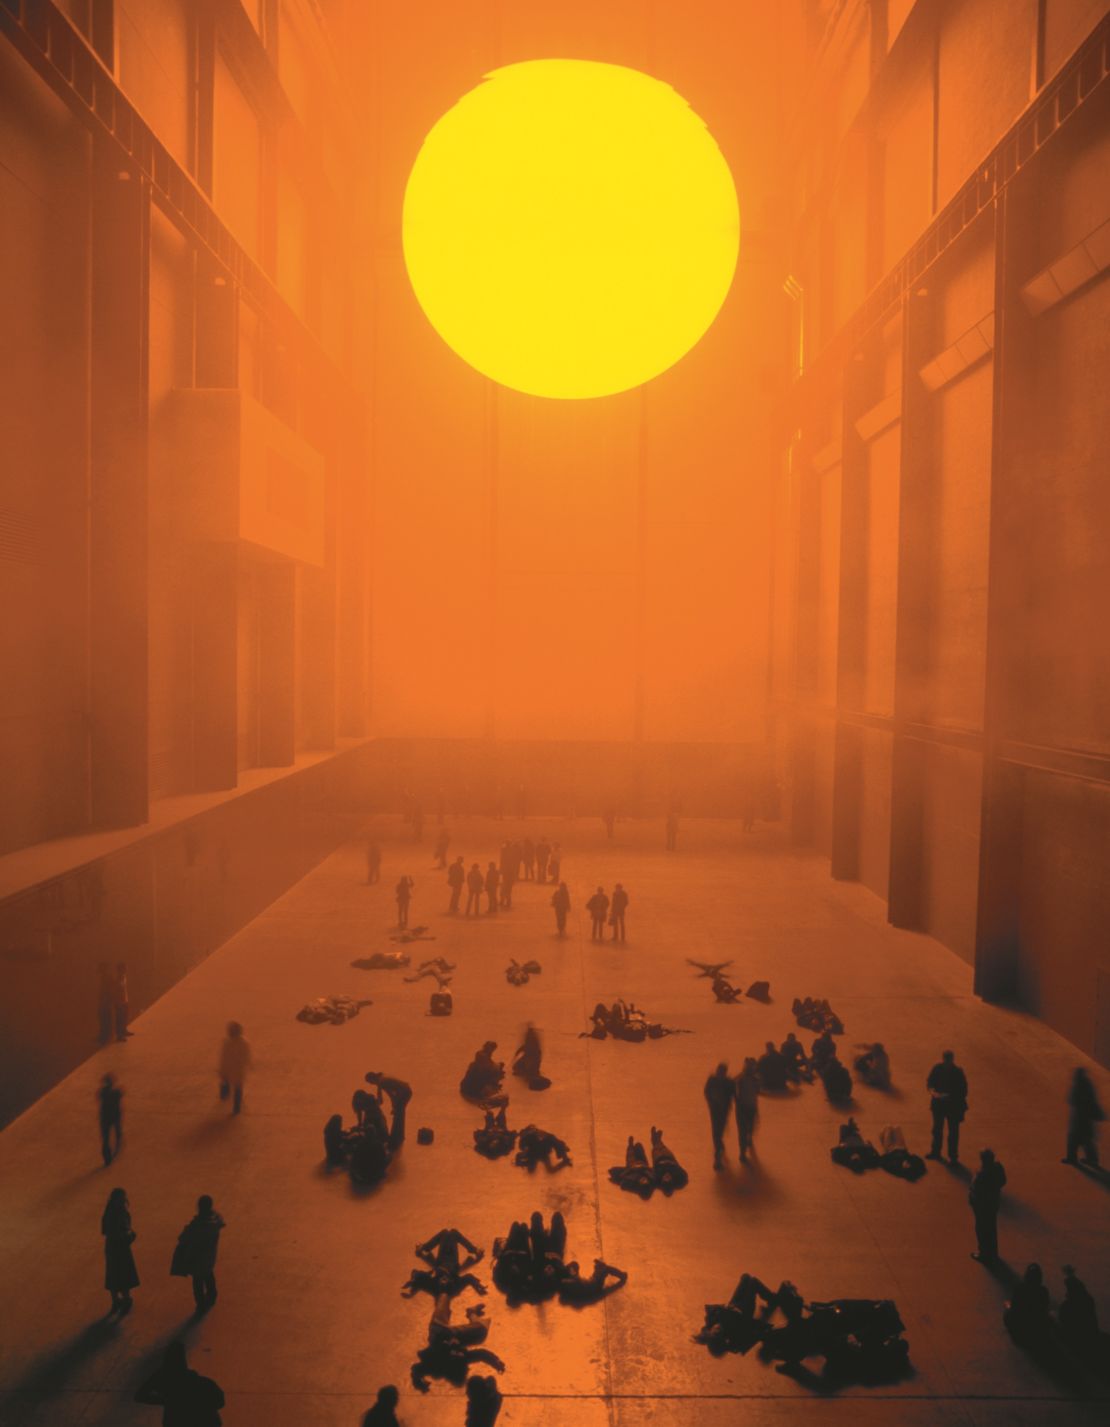 Olafur Eliasson's "The Weather Project."